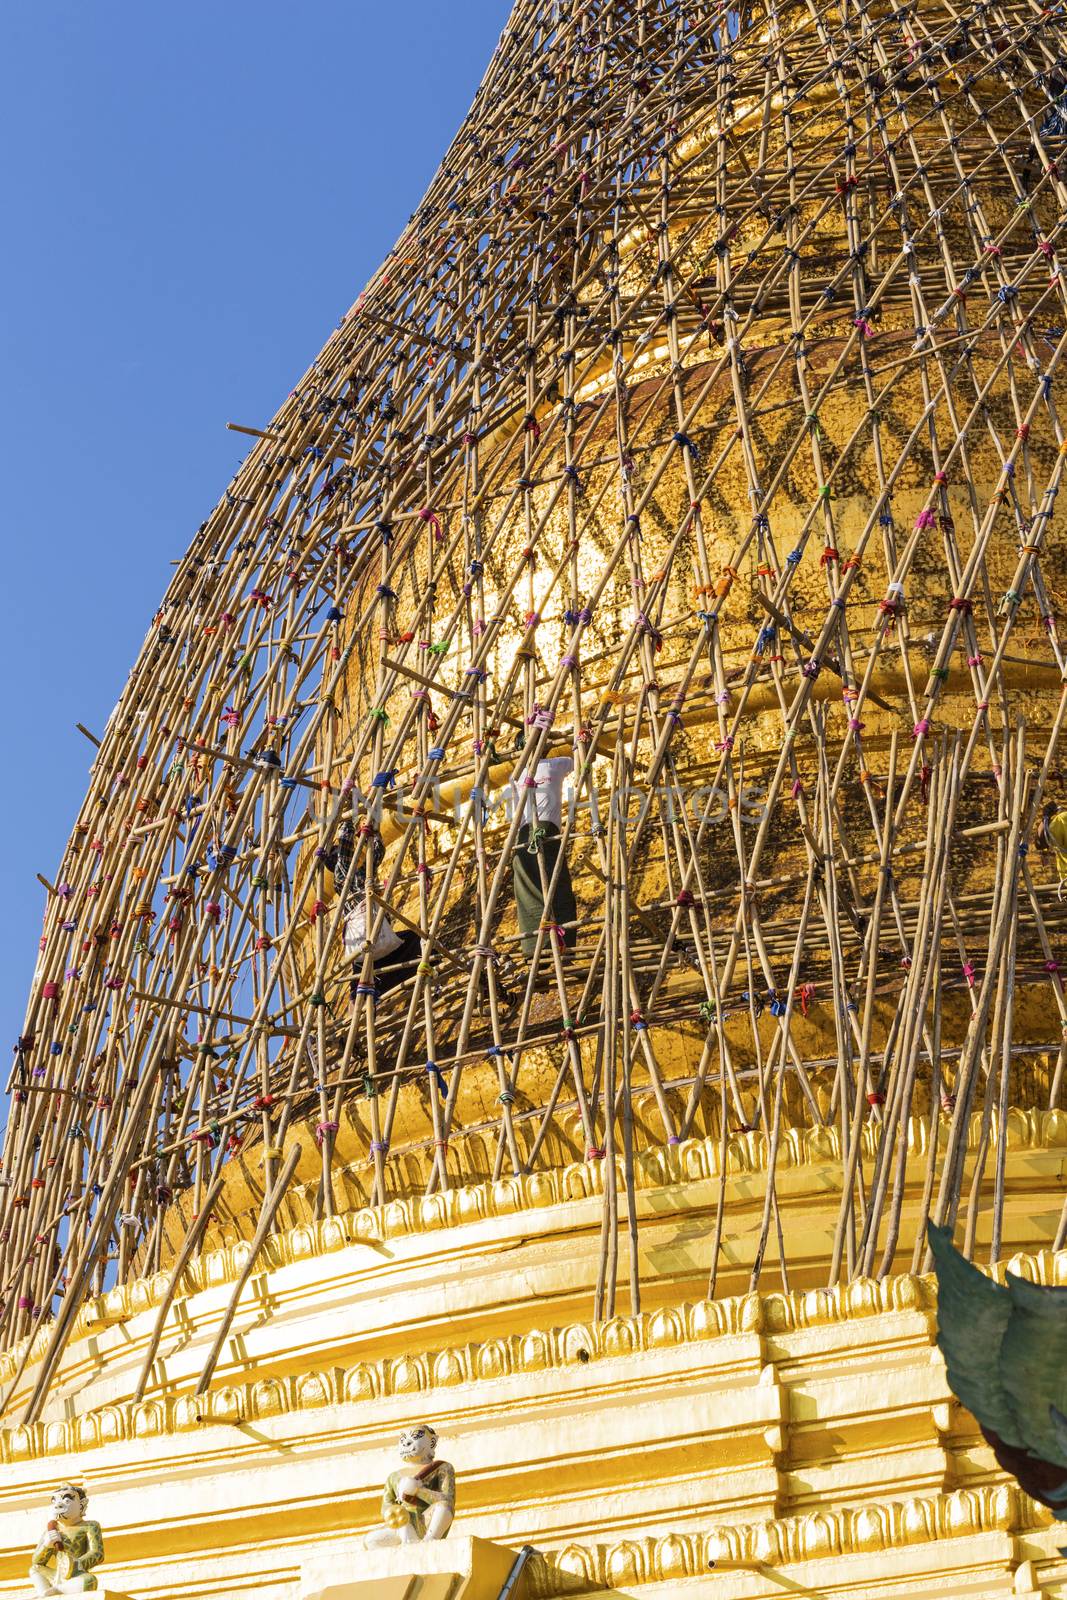 Renovation of temple in myanmar ( Burma ) after earthquake